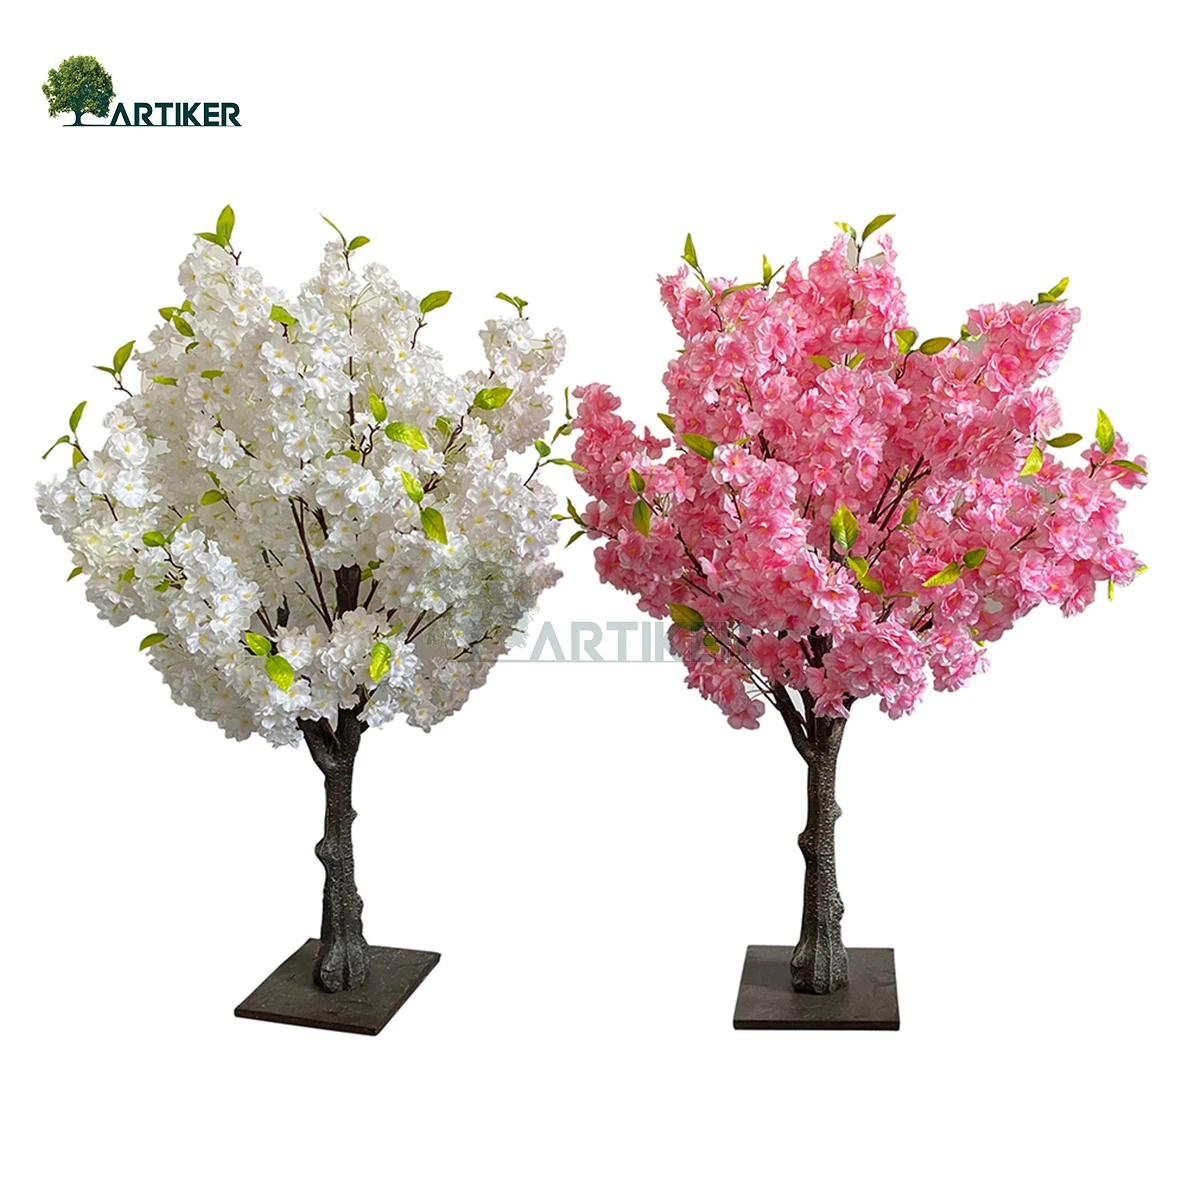 

wholesale 1m high Artificial Mini cherry blossom trees indoor weeding table red cherry blossom tree, Natural color